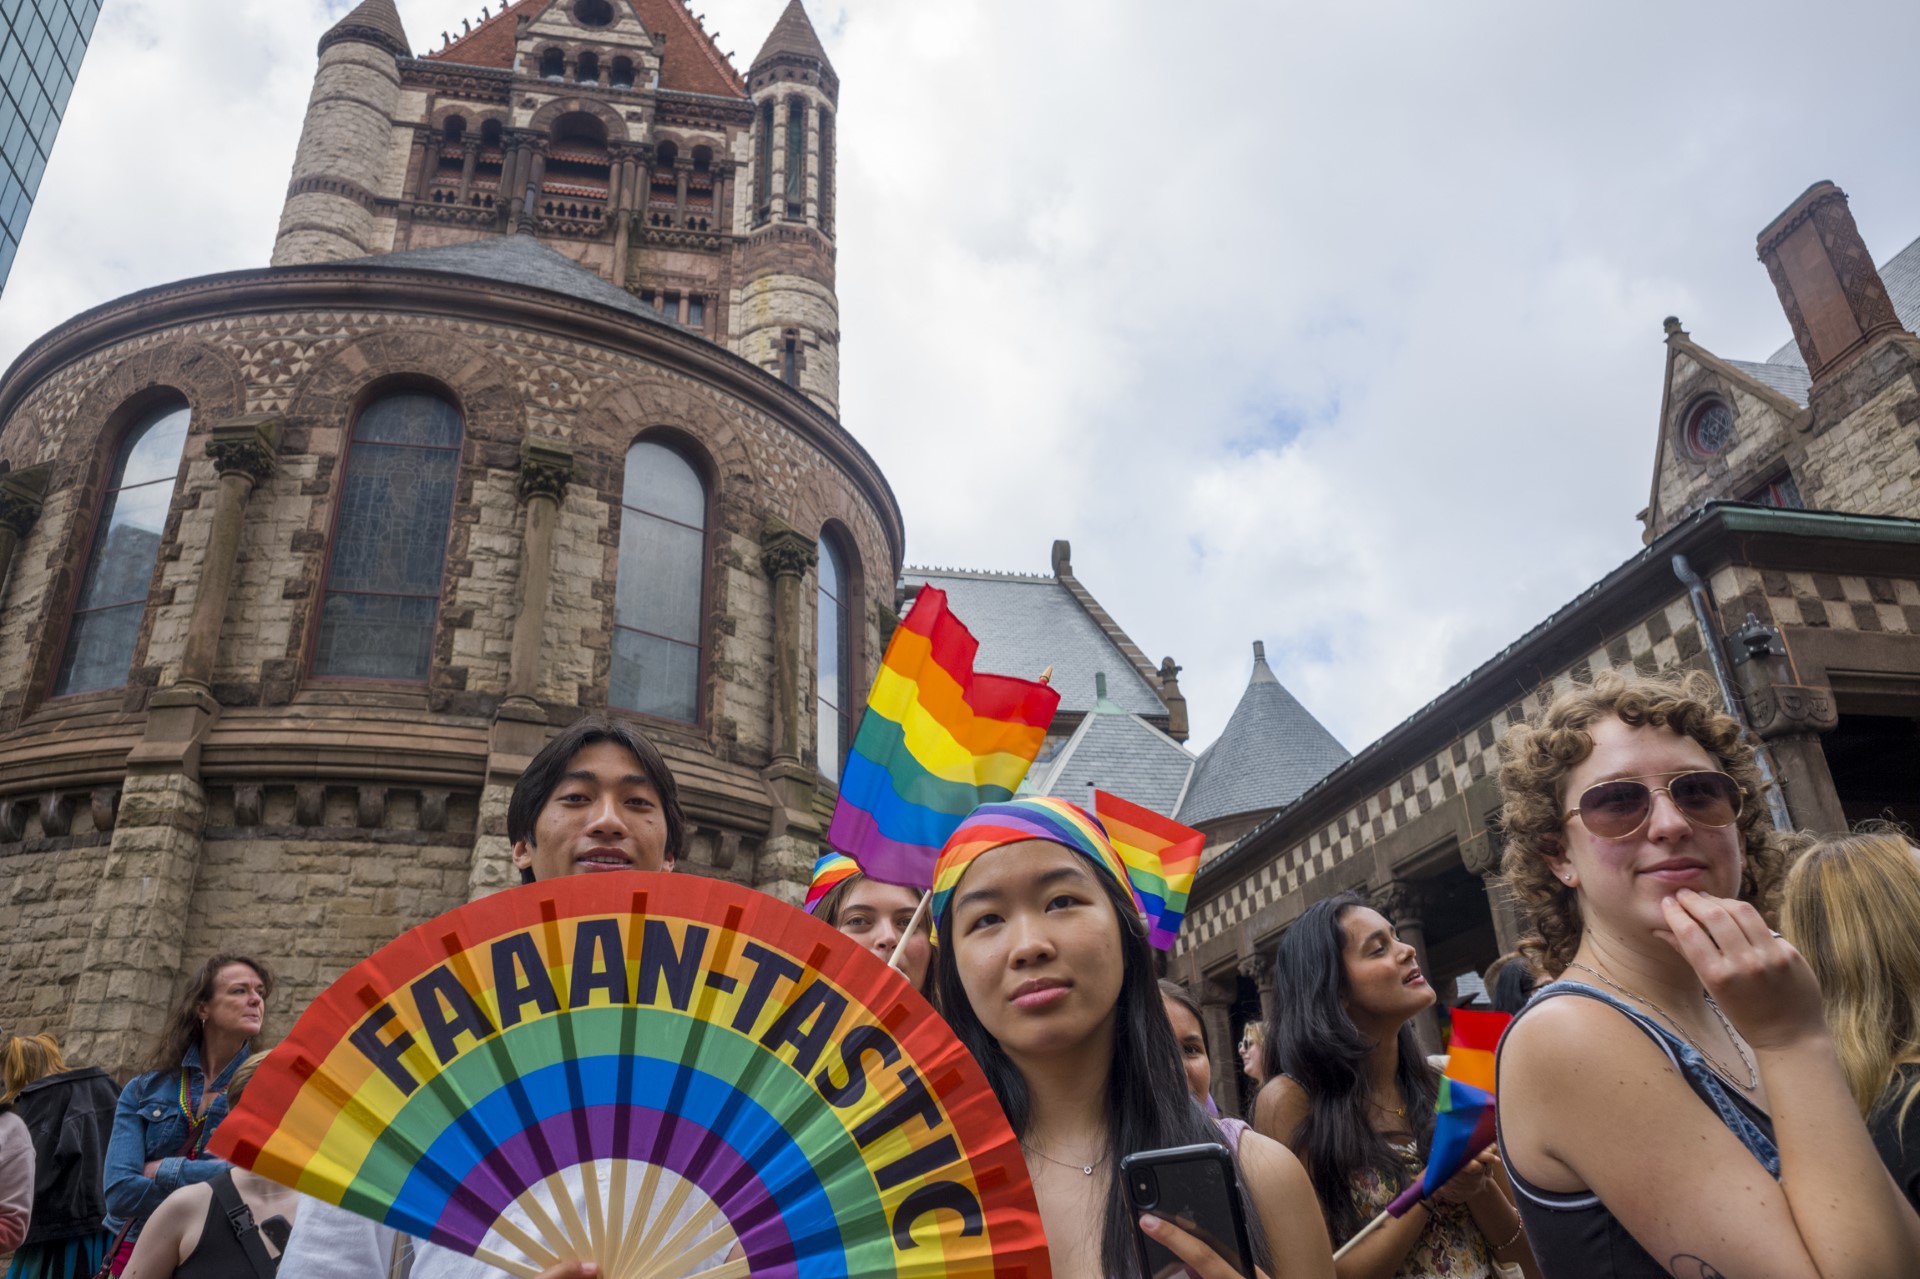 Boston's radically-inclusive Pride for the People parade is re